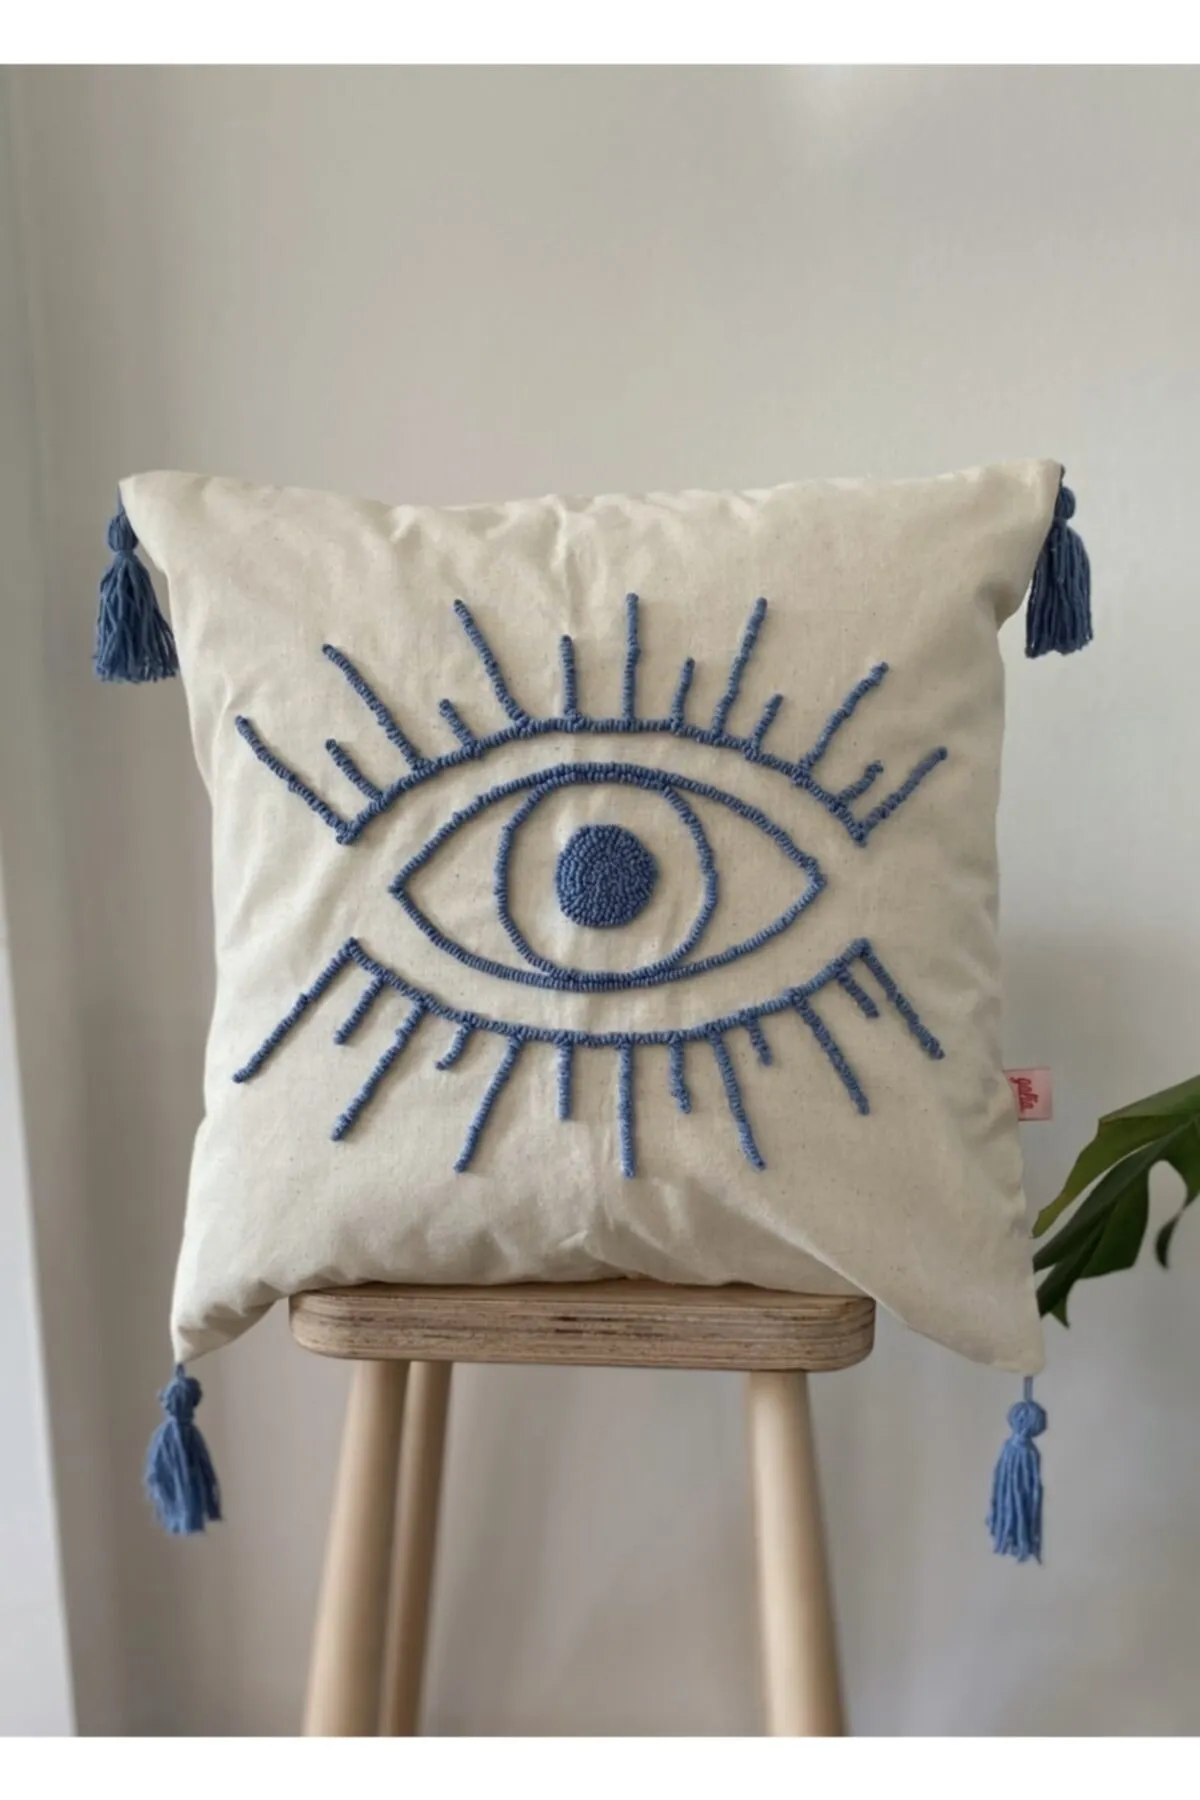 Washed Linen Eye Shaped Punch Pillow Cushion Cover